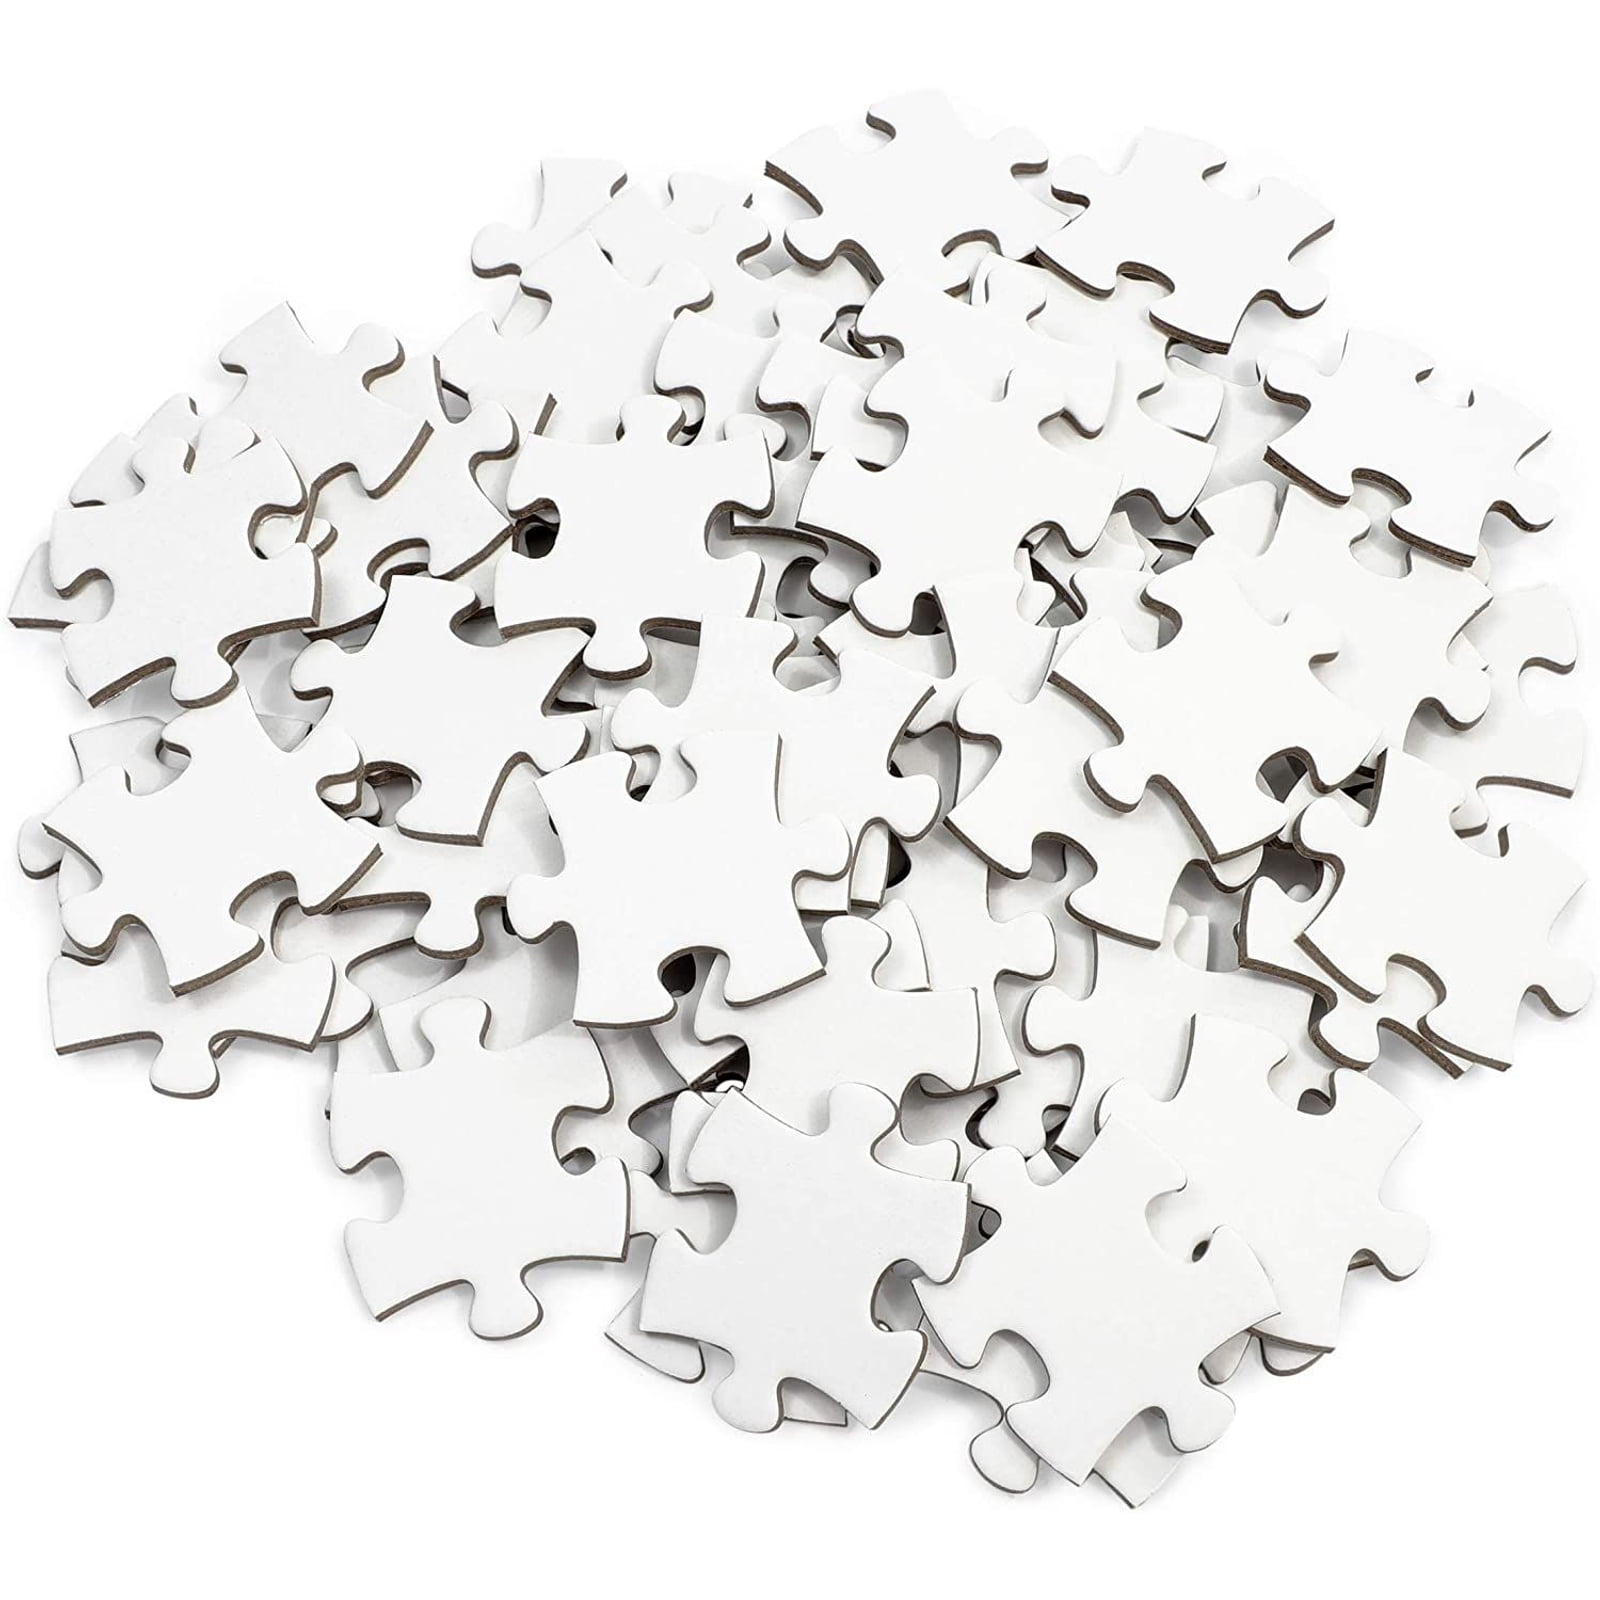 7 X 5 Blank Wooden Jigsaw Puzzle 